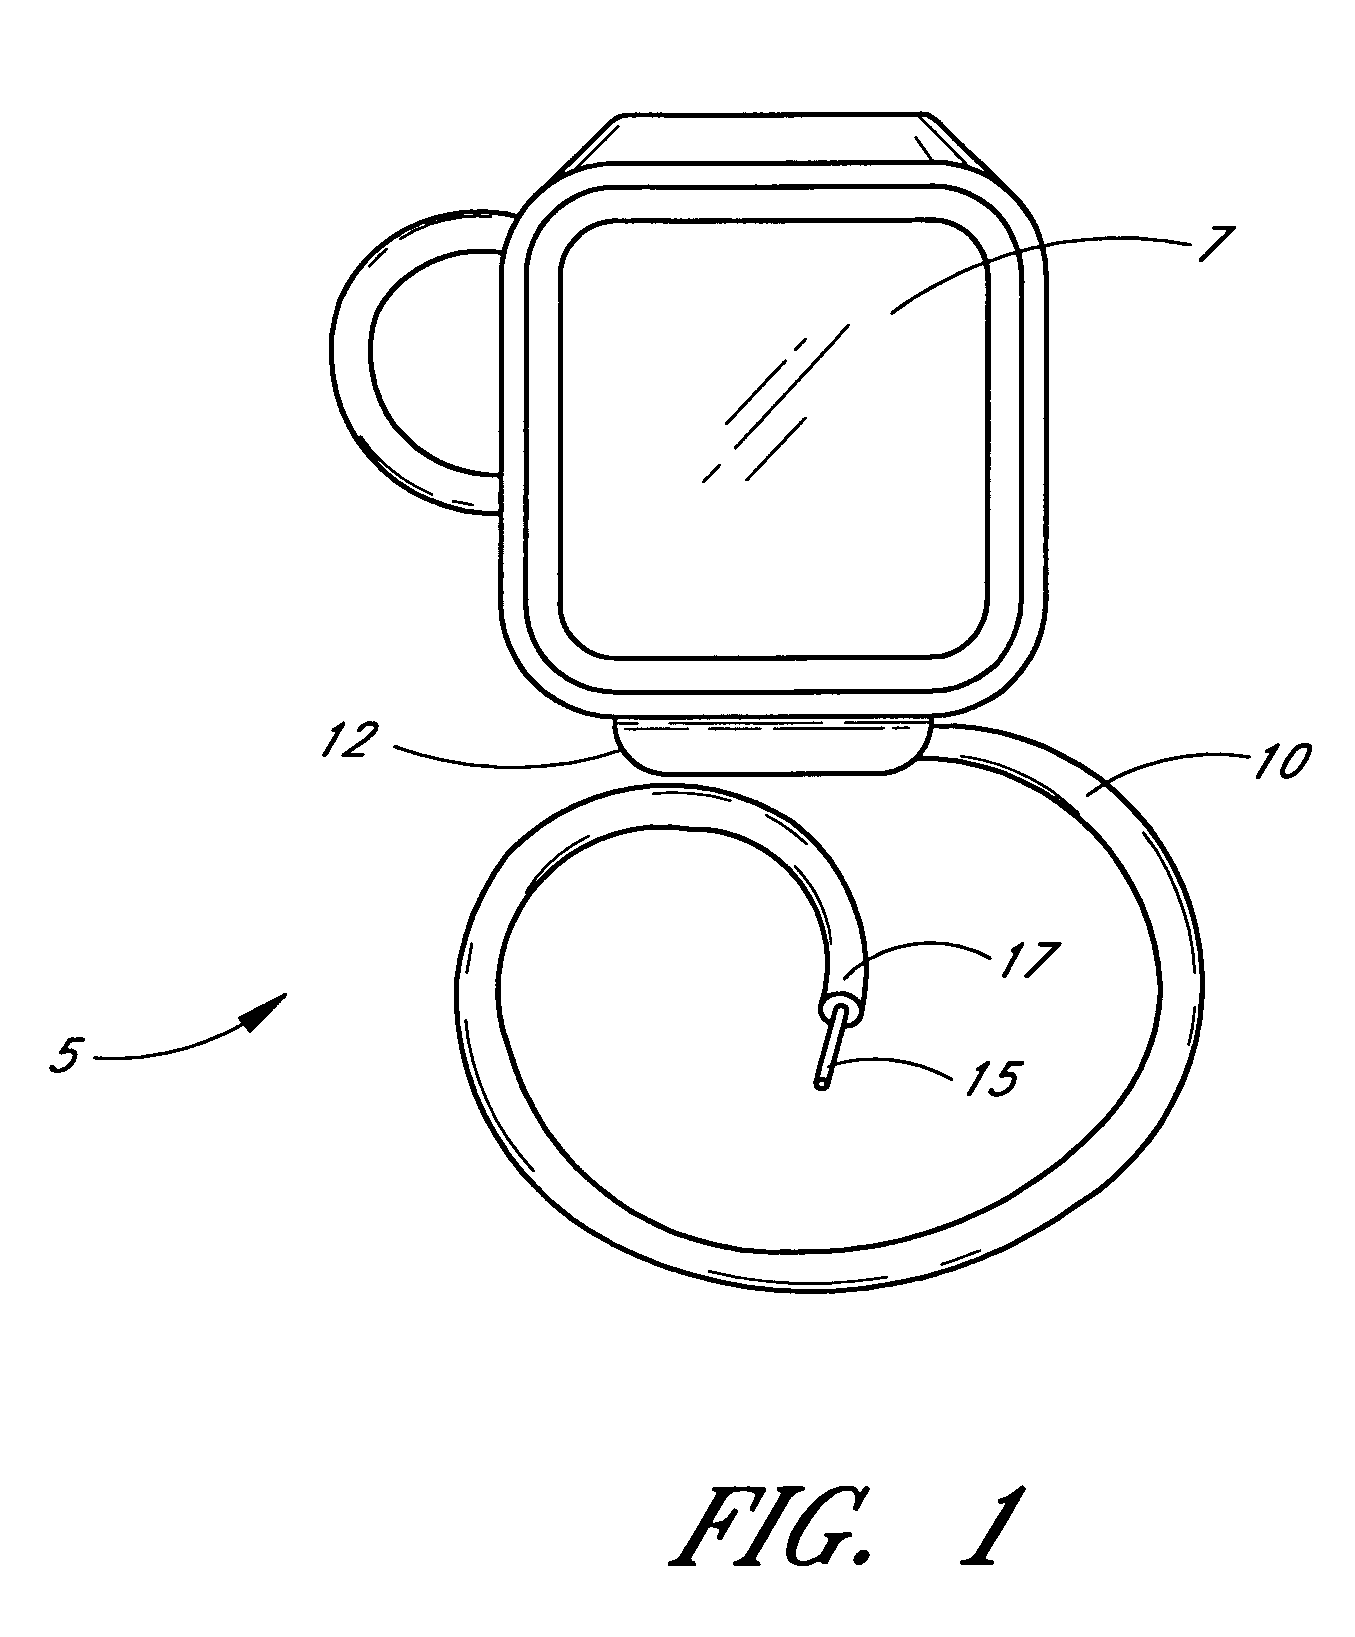 Method for detecting, diagnosing, and treating cardiovascular disease